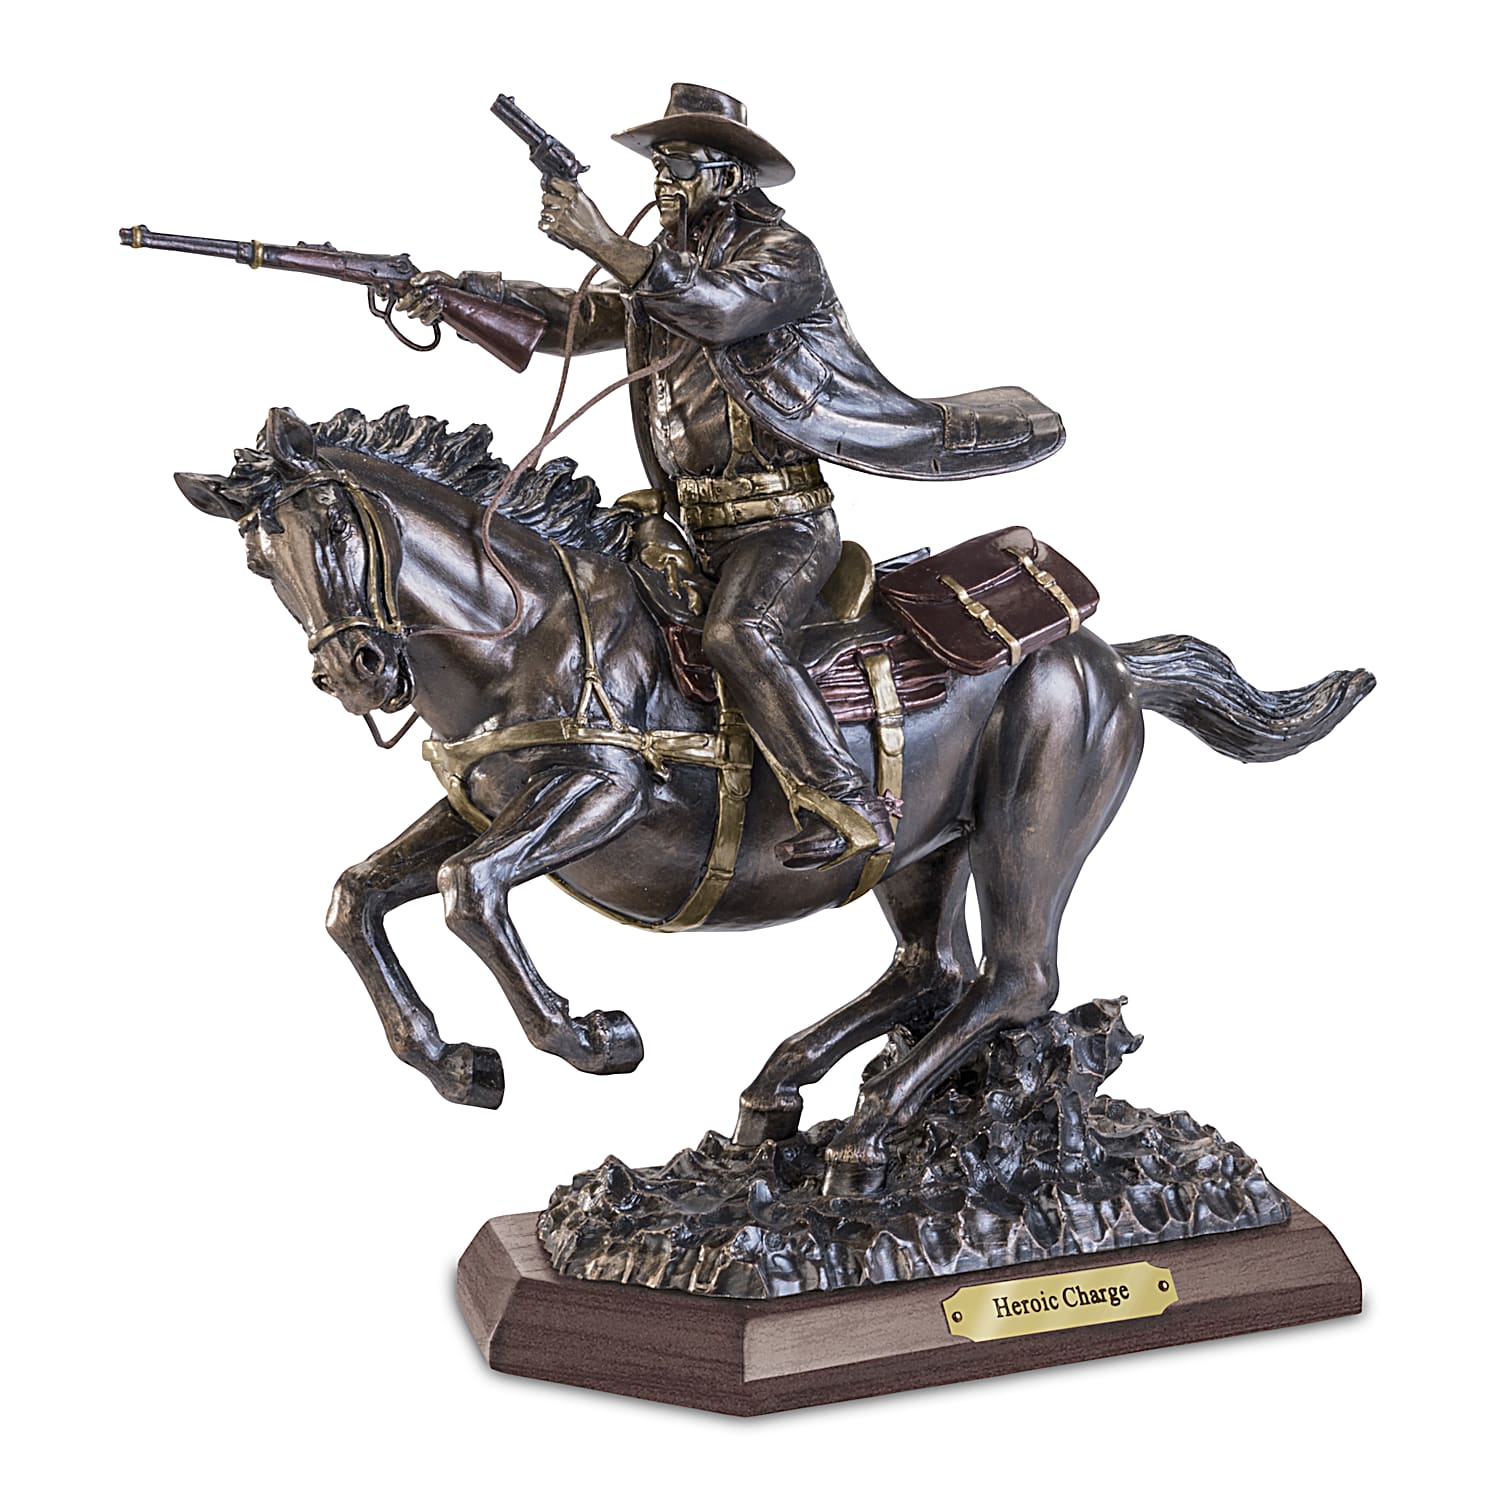 The price of the reign” Limited edition bronze sculpture - John